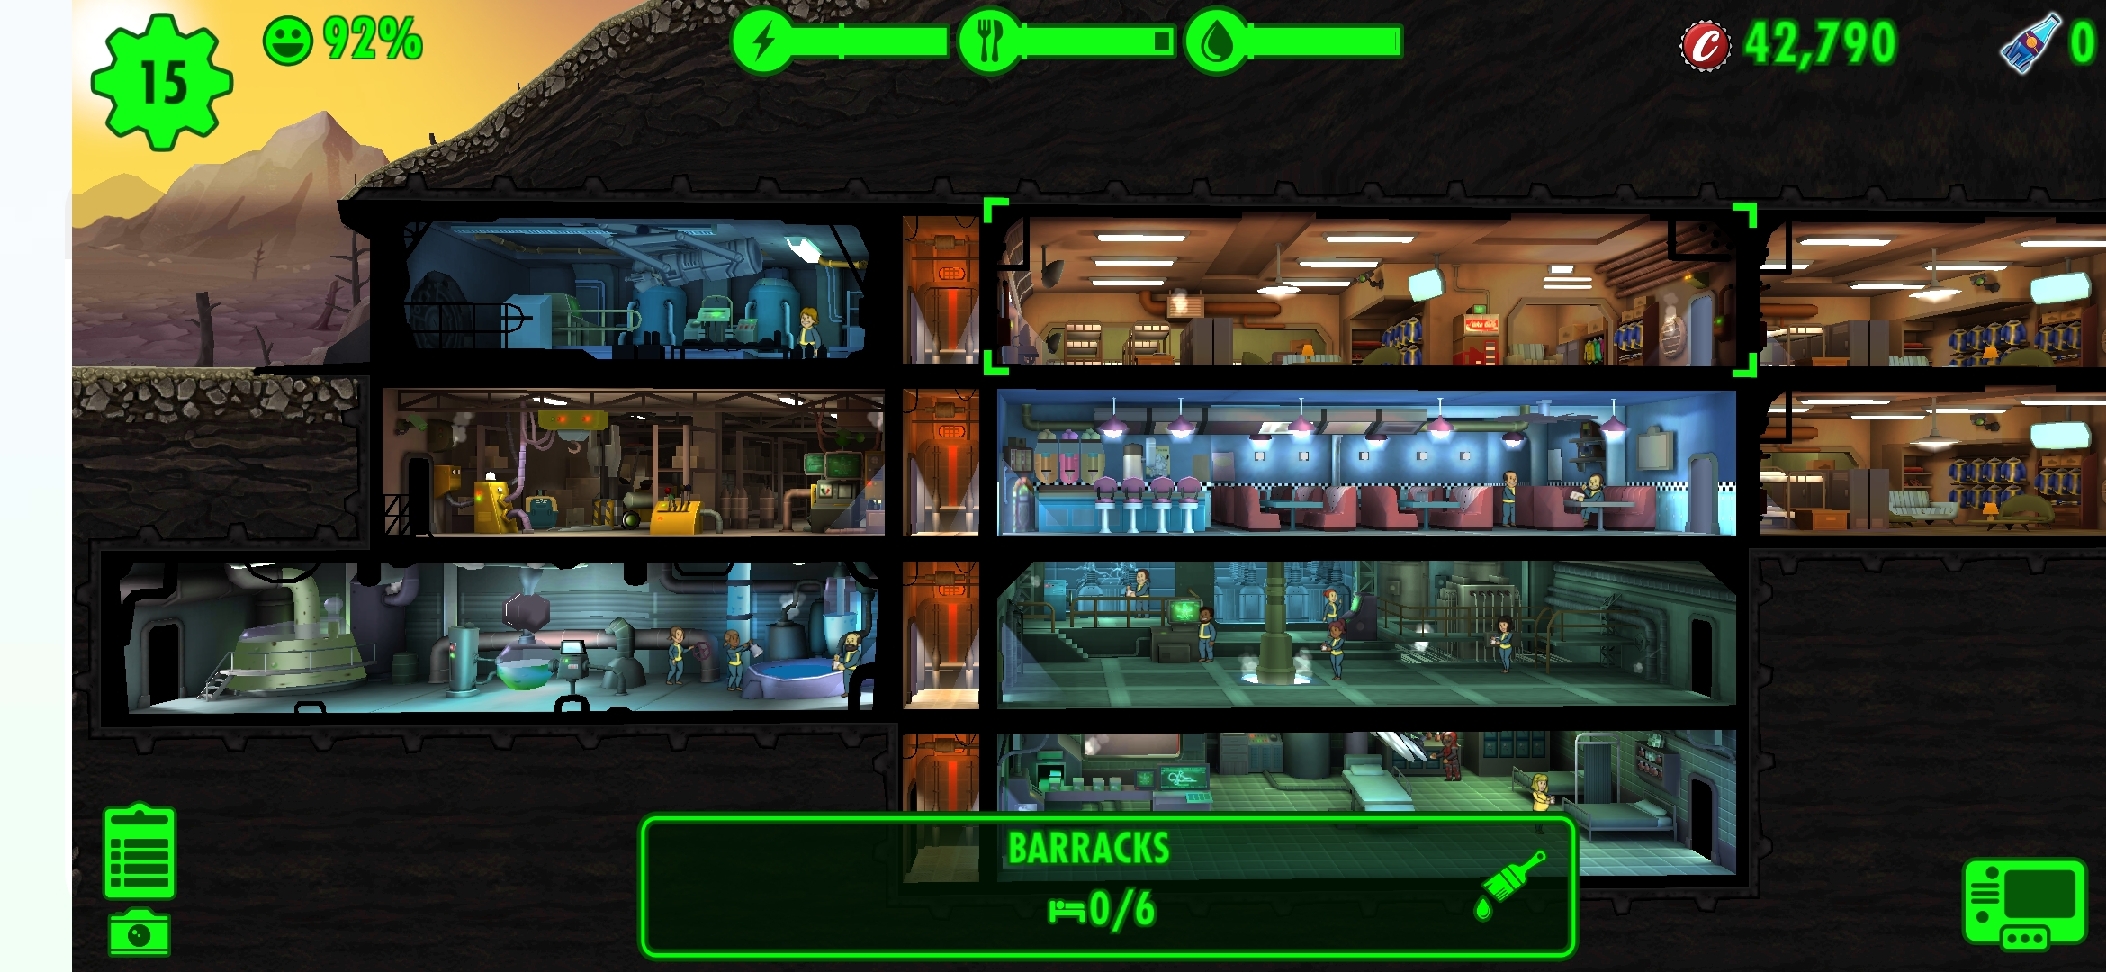 fallout shelter mod no root apk